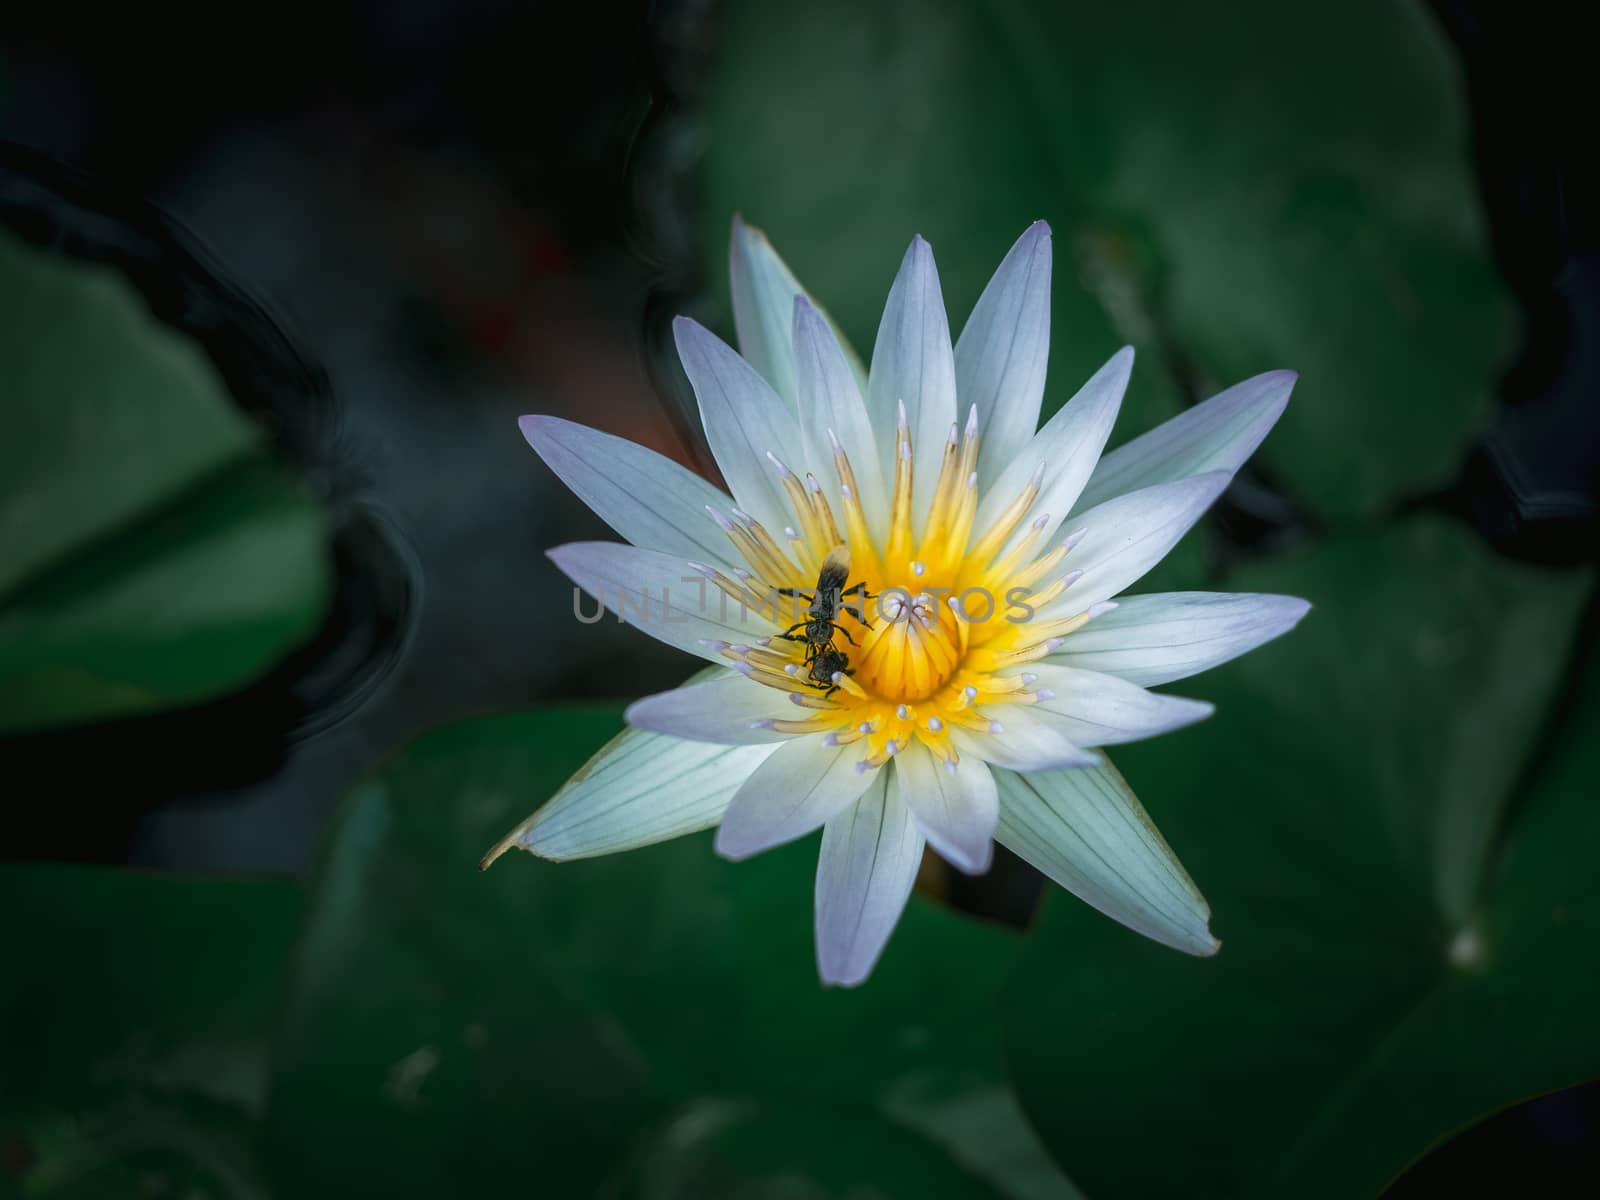 Close-up beautiful white lotus flower with two bugs on the yellow pollen in the pond with green lotus leaves, dark tone.